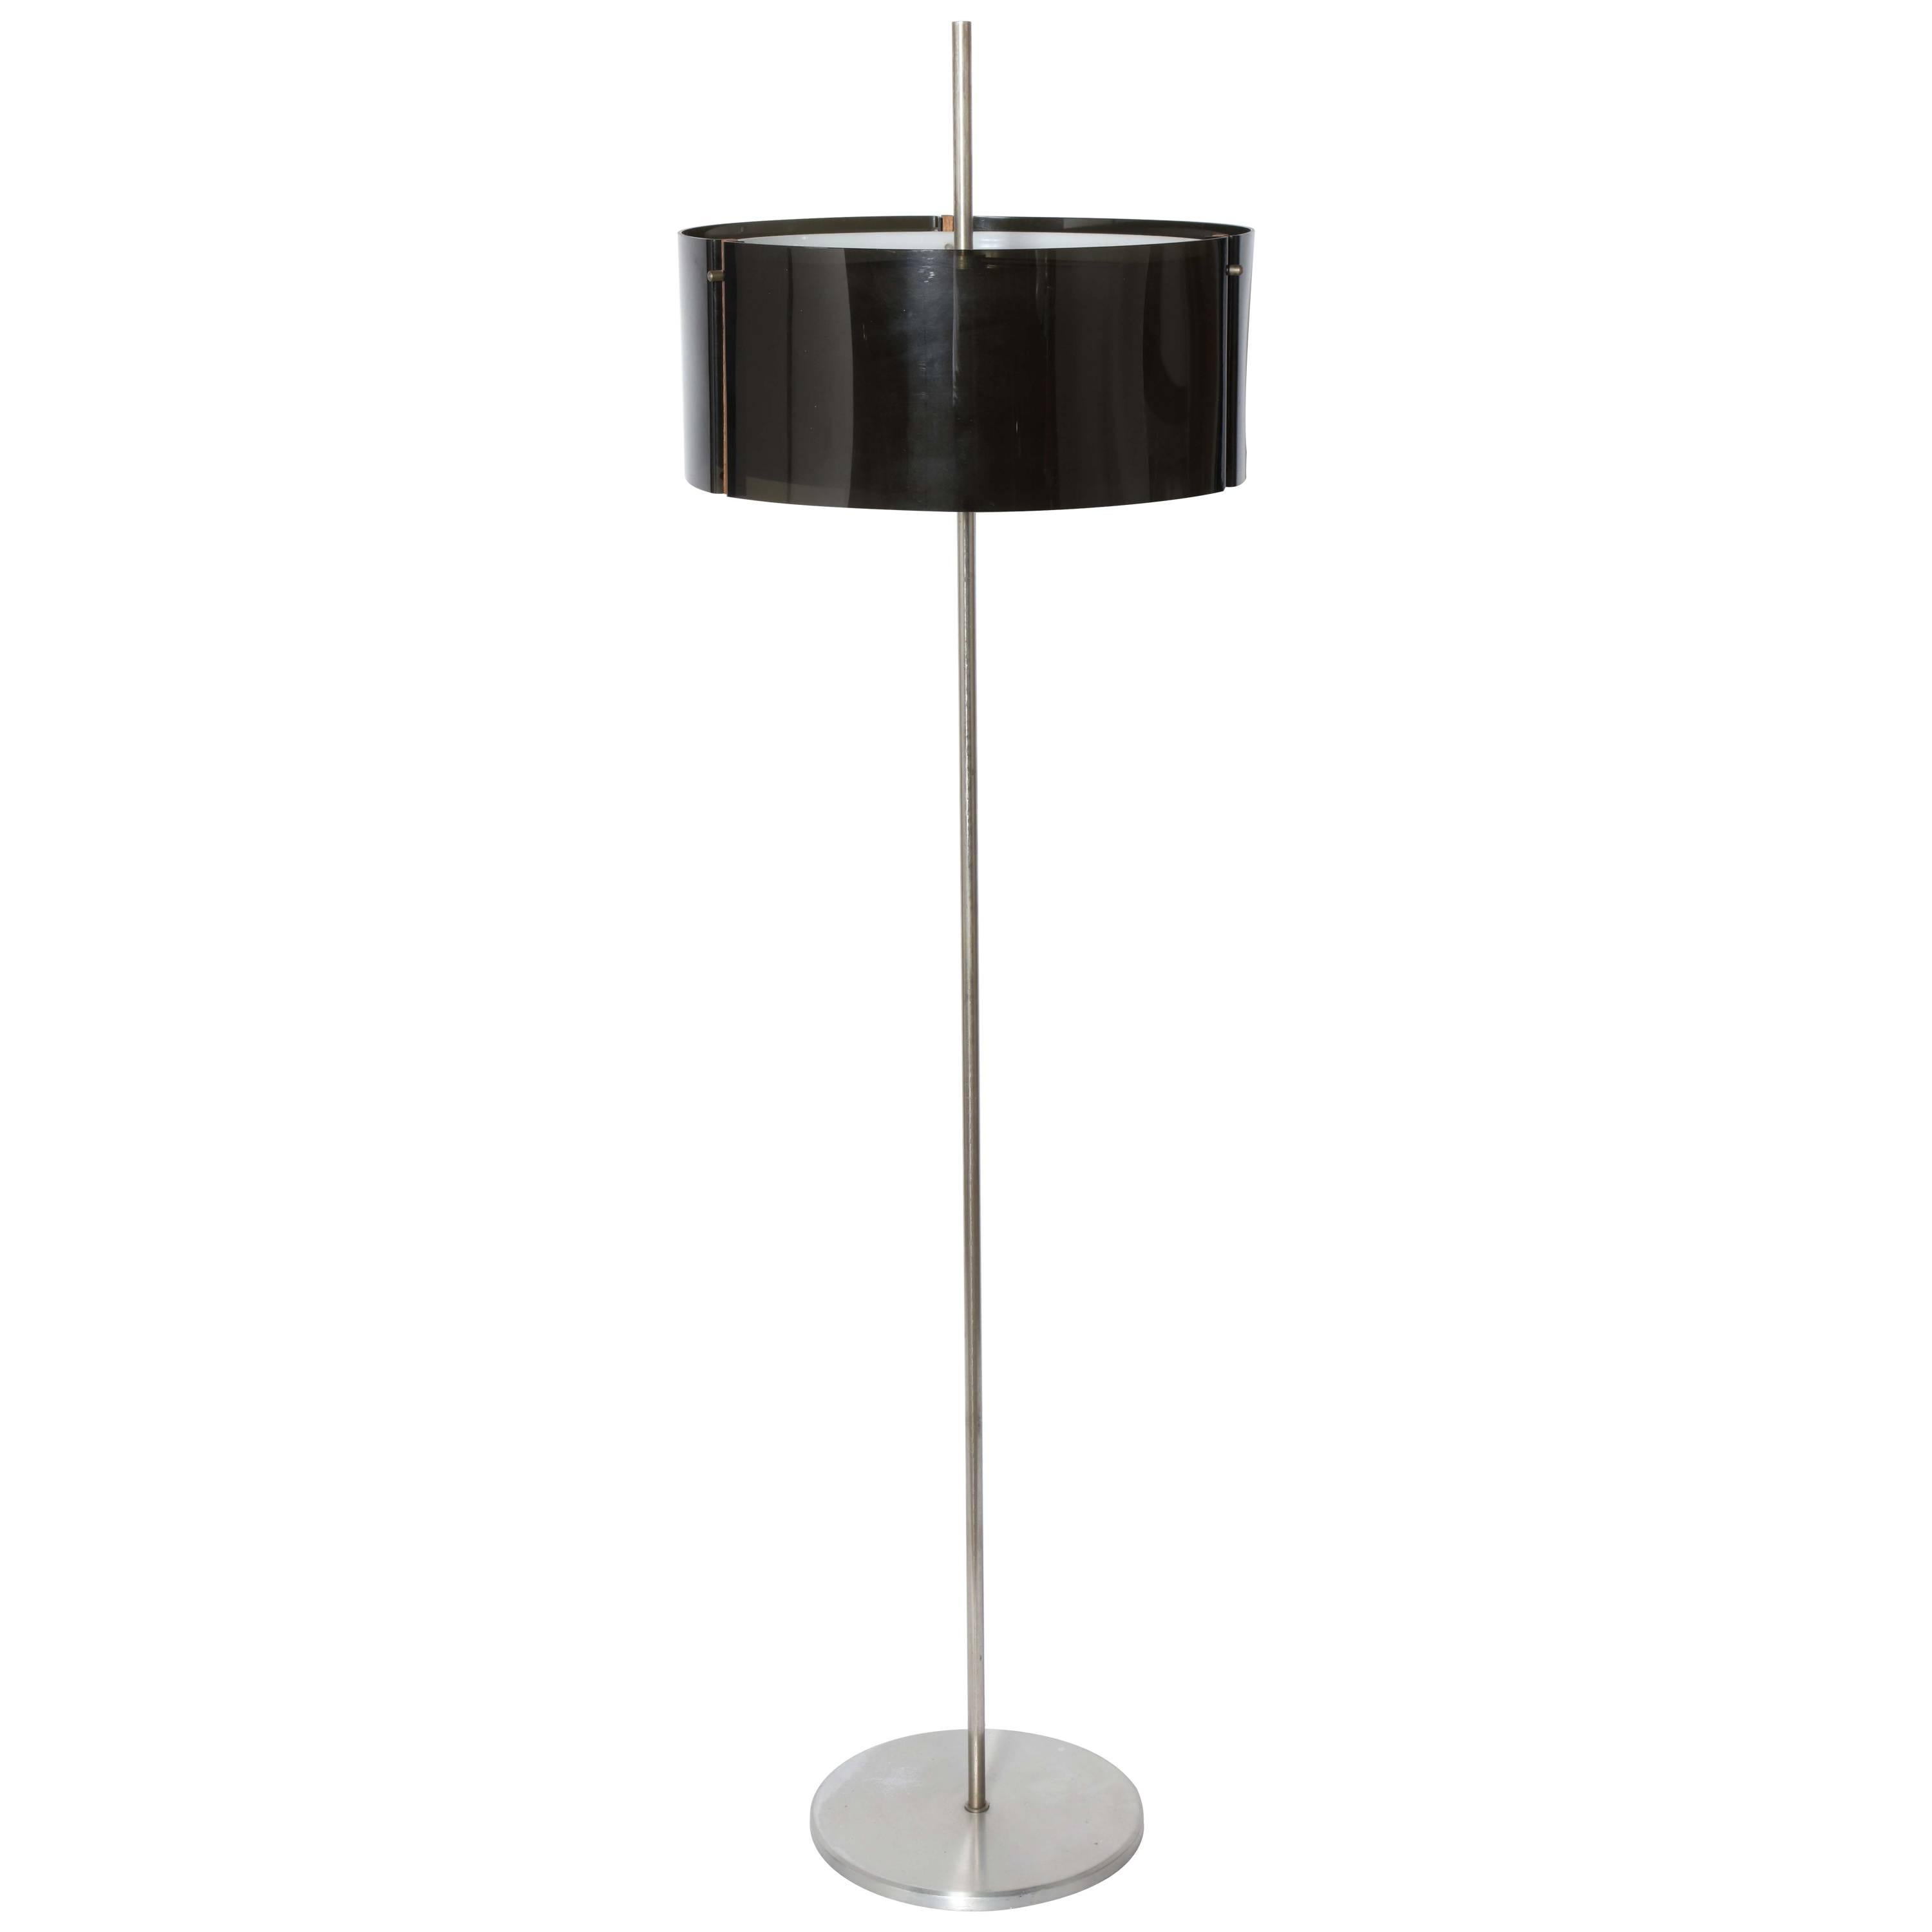 Scandinavian Modern Brushed Aluminum Double Shade Reading Floor Lamp with Outer Shade in Smoky Grey, Inner Shade in Off White Lucite, clasped with Wood details. Featuring a thin tubular Brushed Aluminum stem, round Brushed Aluminum top, tripod top